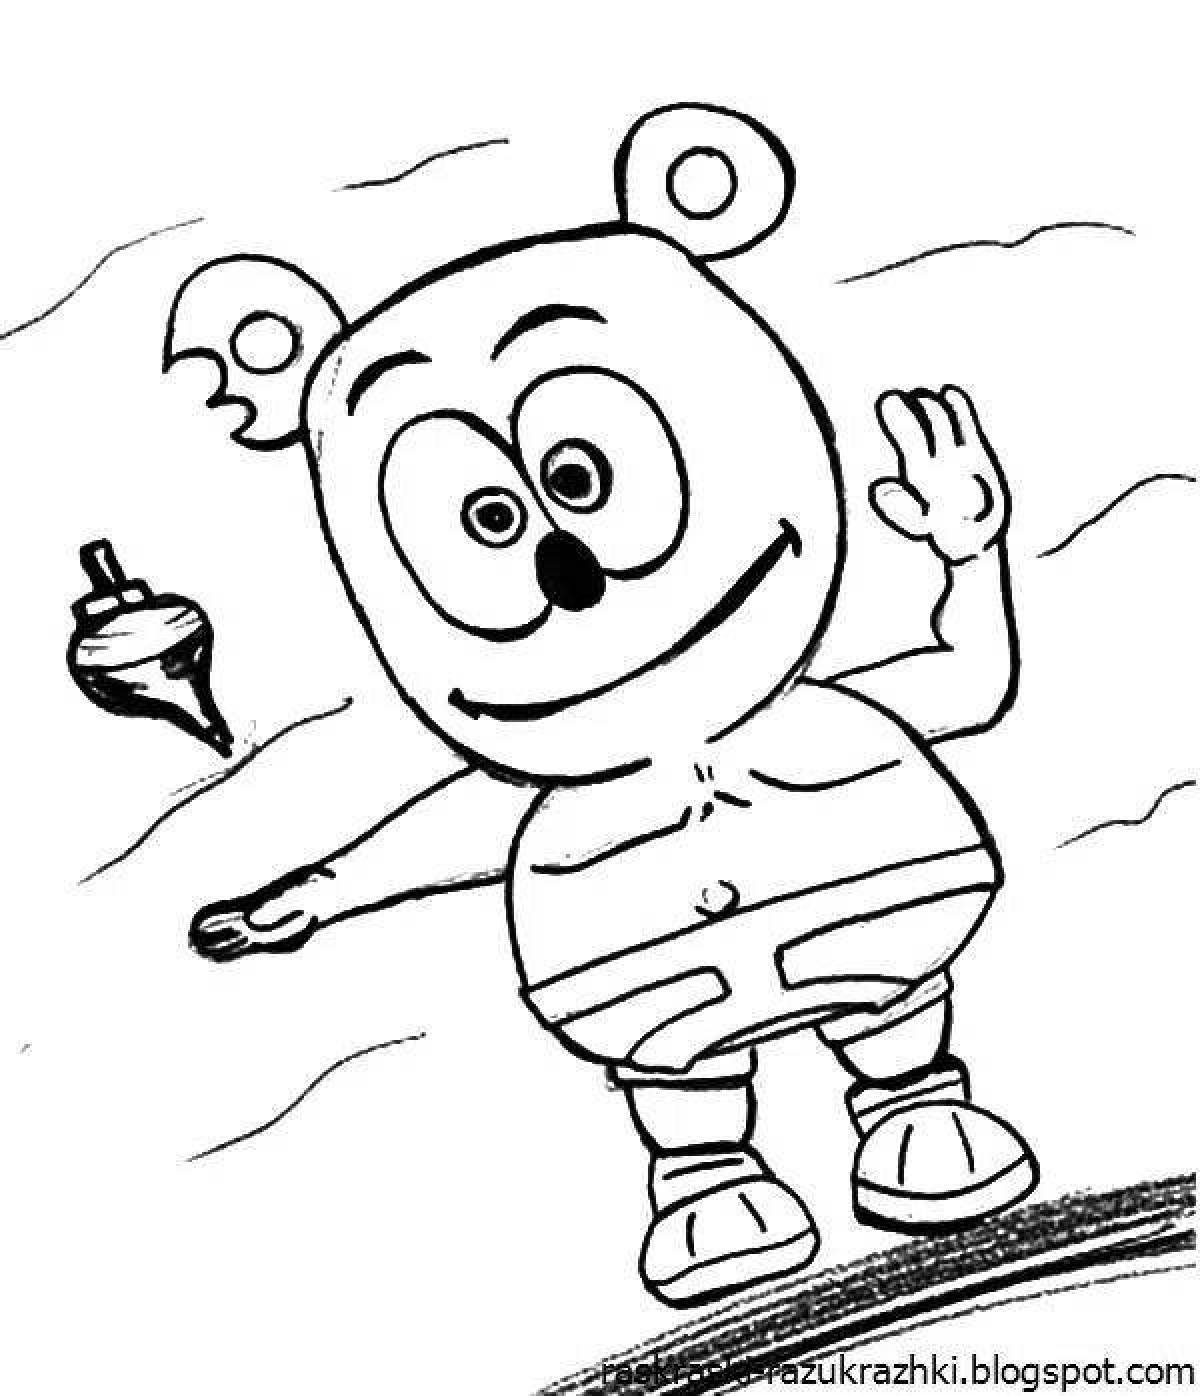 Colorful humber bear coloring page